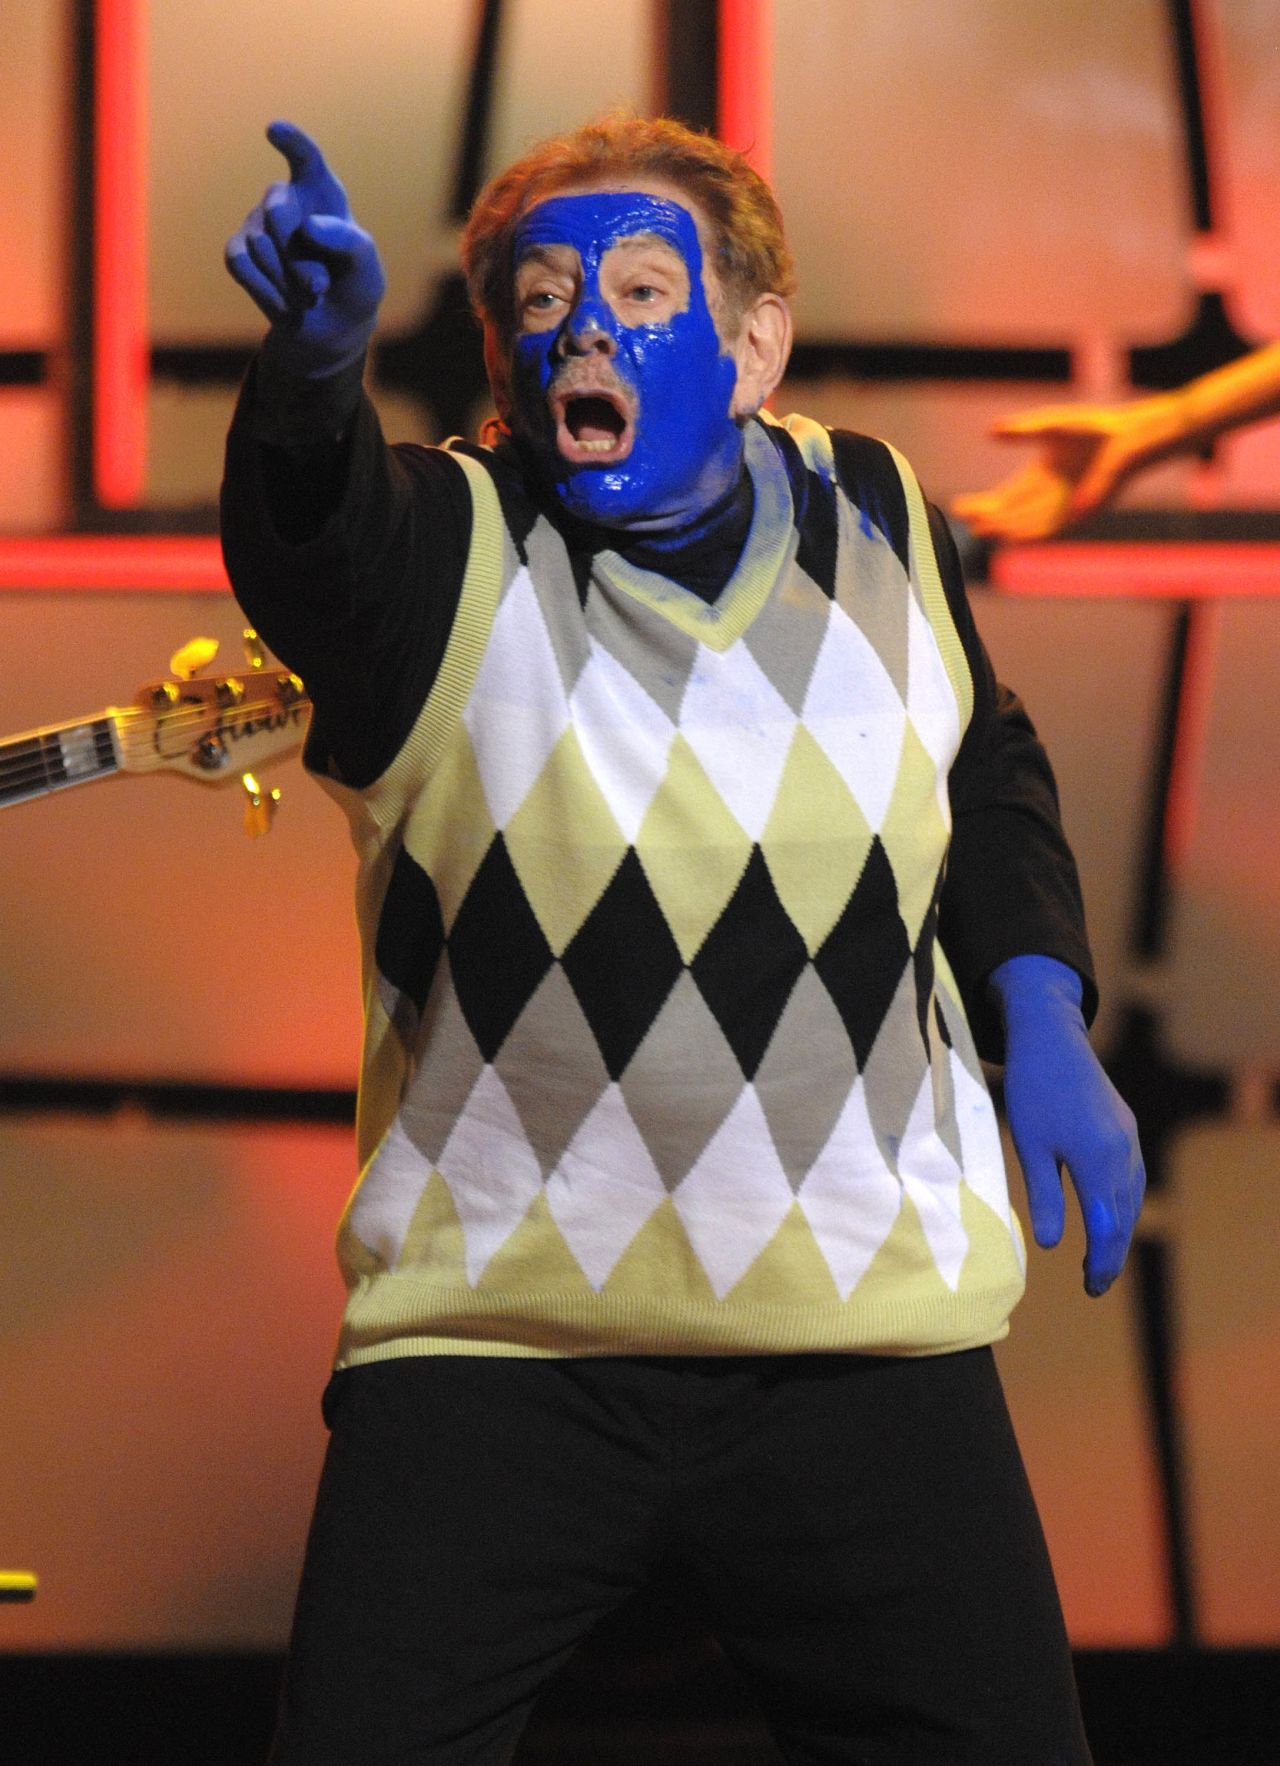 Stiller is dressed as a member of the Blue Man Group during a Comedy Central special in 2008. The "Night of Too Many Stars" raised money for autism education.